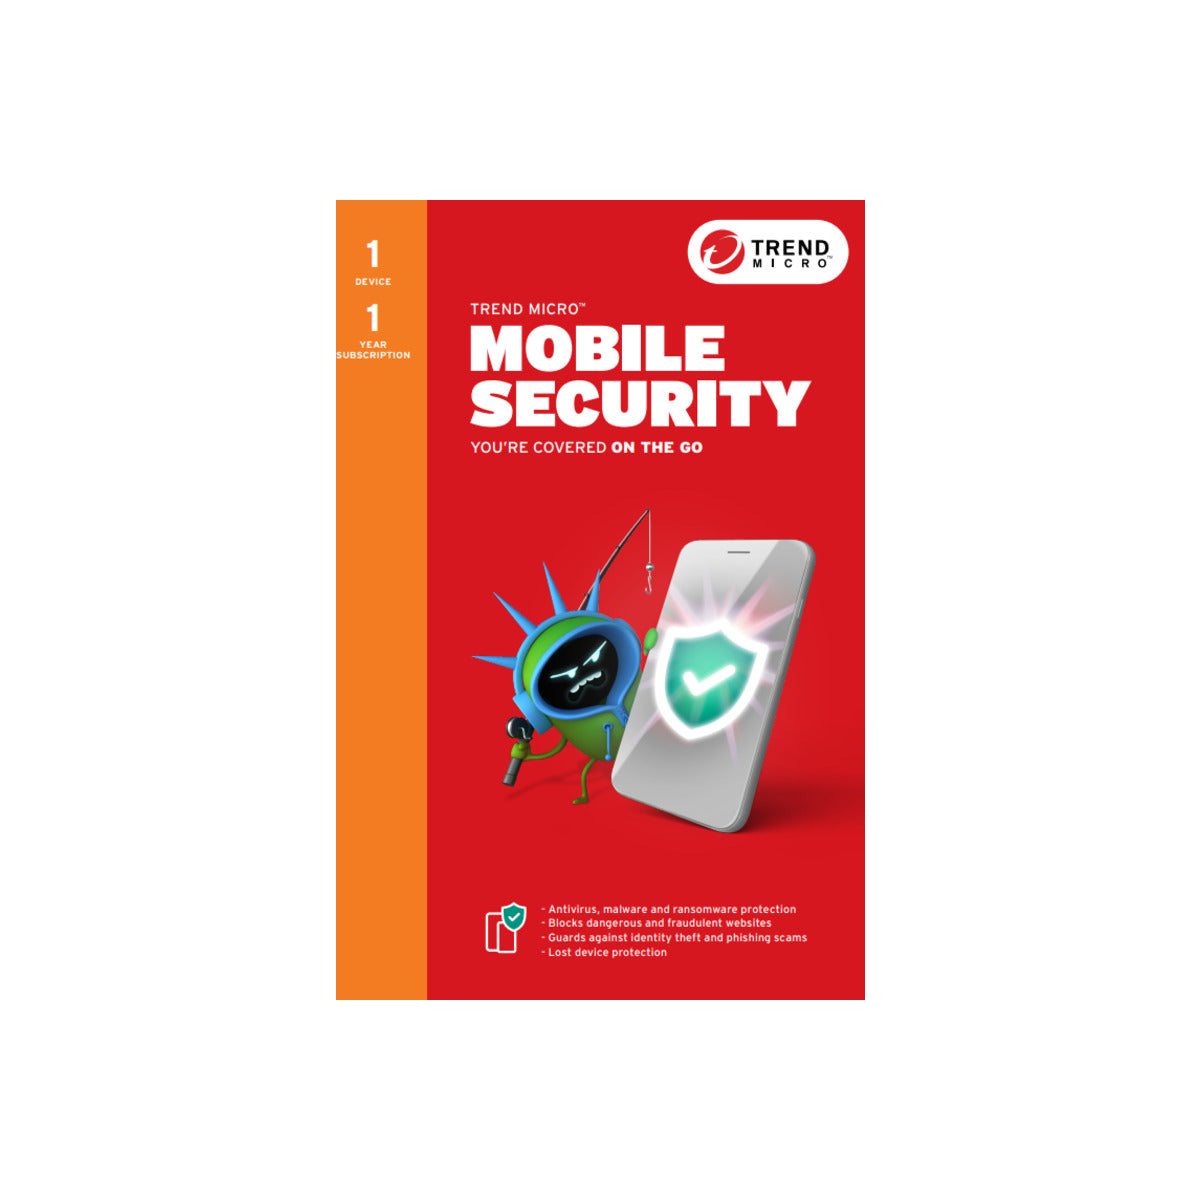 Trend Micro Mobile Security 1D 1Y: Comprehensive mobile device protection for Android and iOS devices